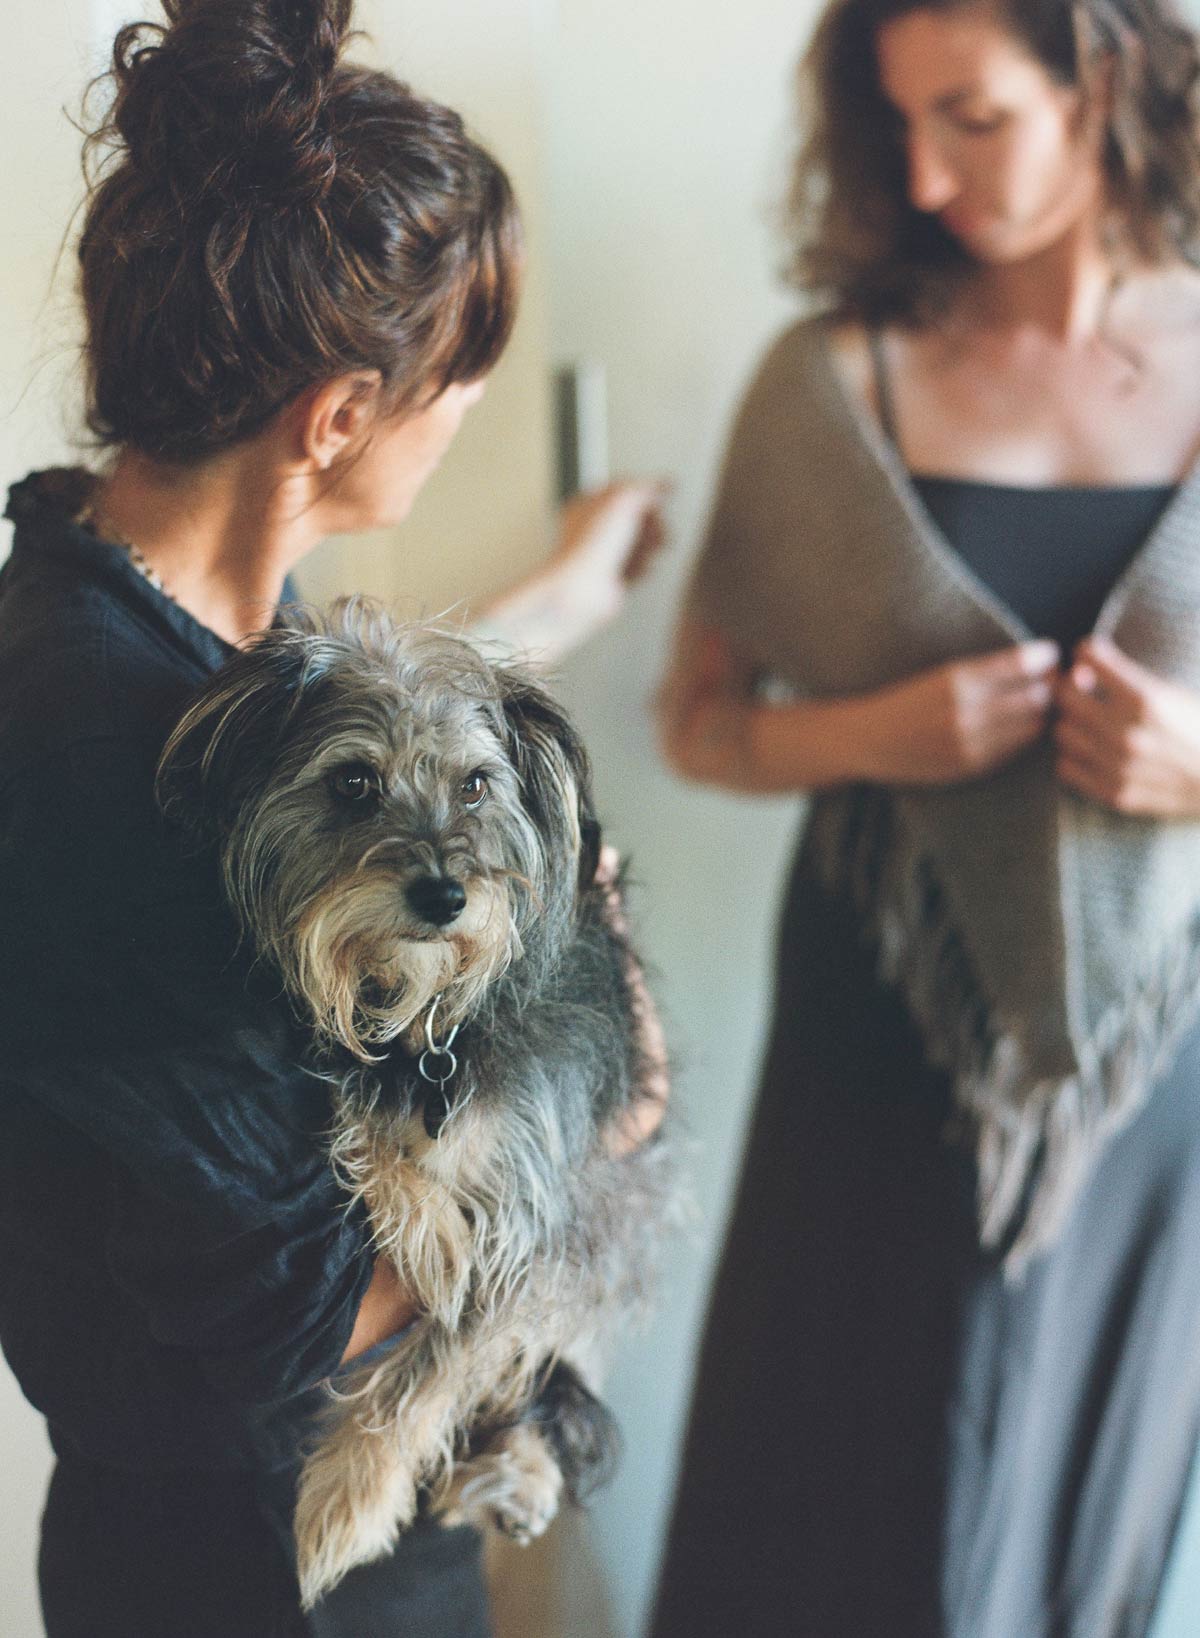 jess brown styling a model and holding her dog rocco